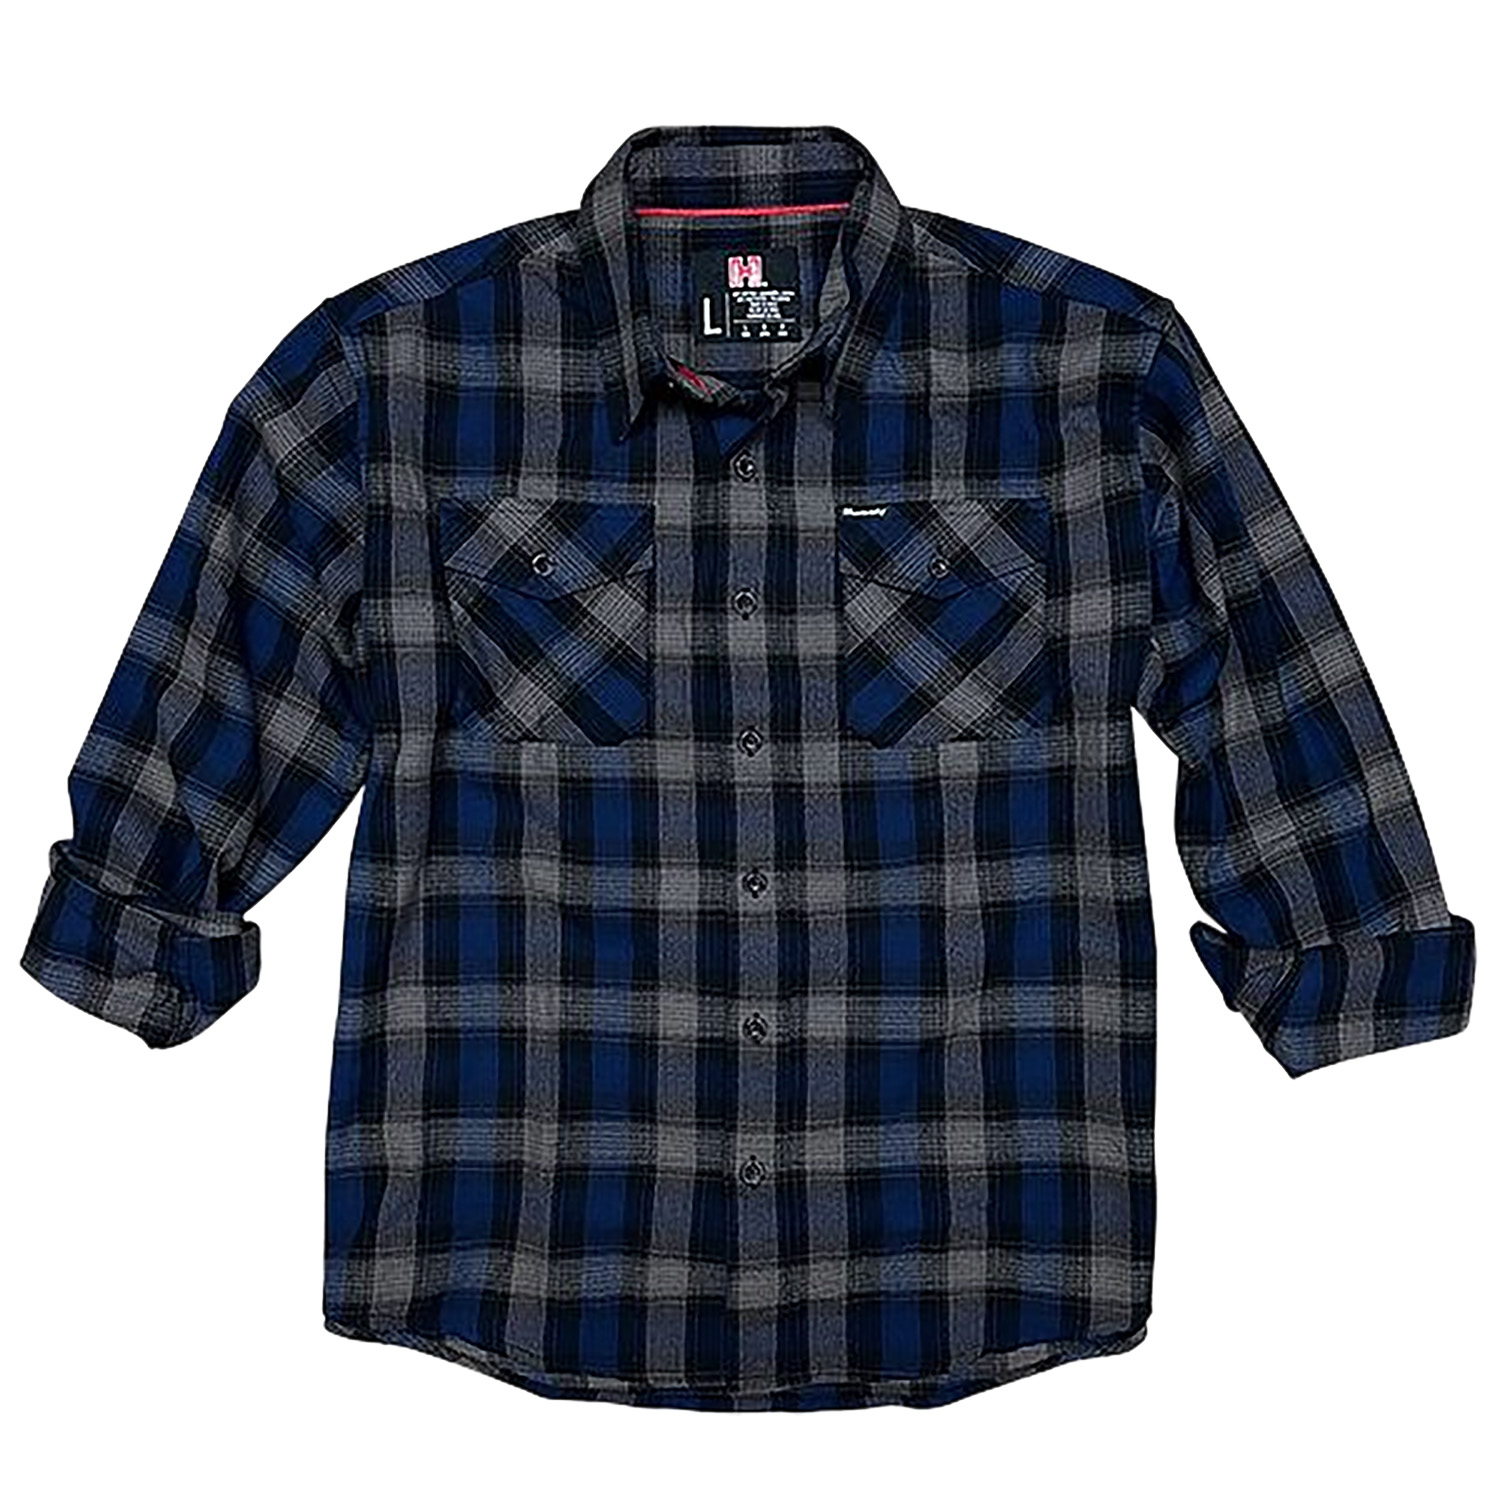 Hornady Gear 32205 Flannel Shirt 2Xl Navy/Black/Gray, Cotton/Polyester, Relaxed Fit Button Up